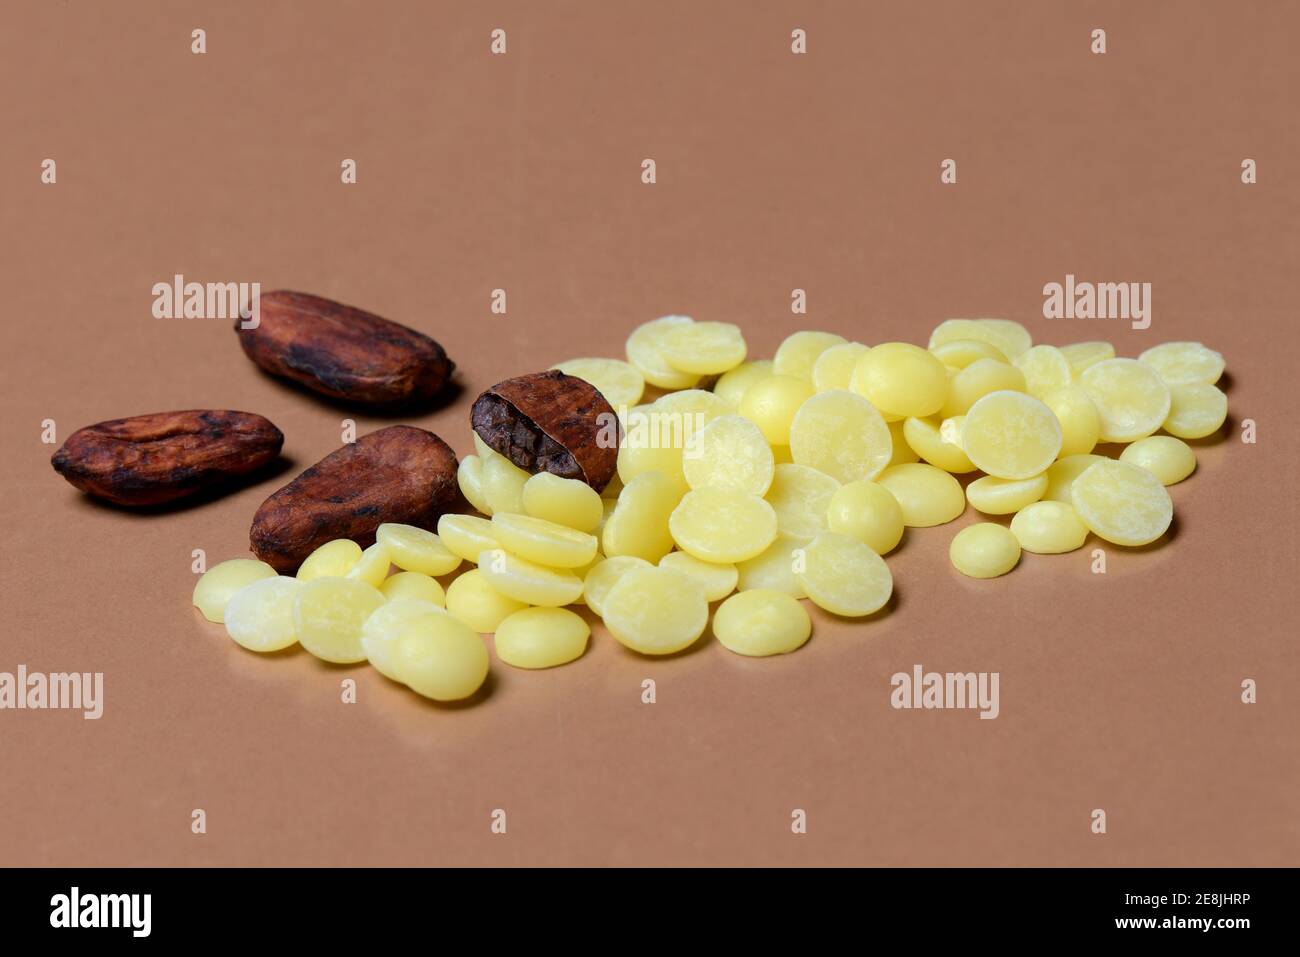 Cocoa butter chips and cocoa beans( Theobroma cacao) , chocolate ingredient Stock Photo